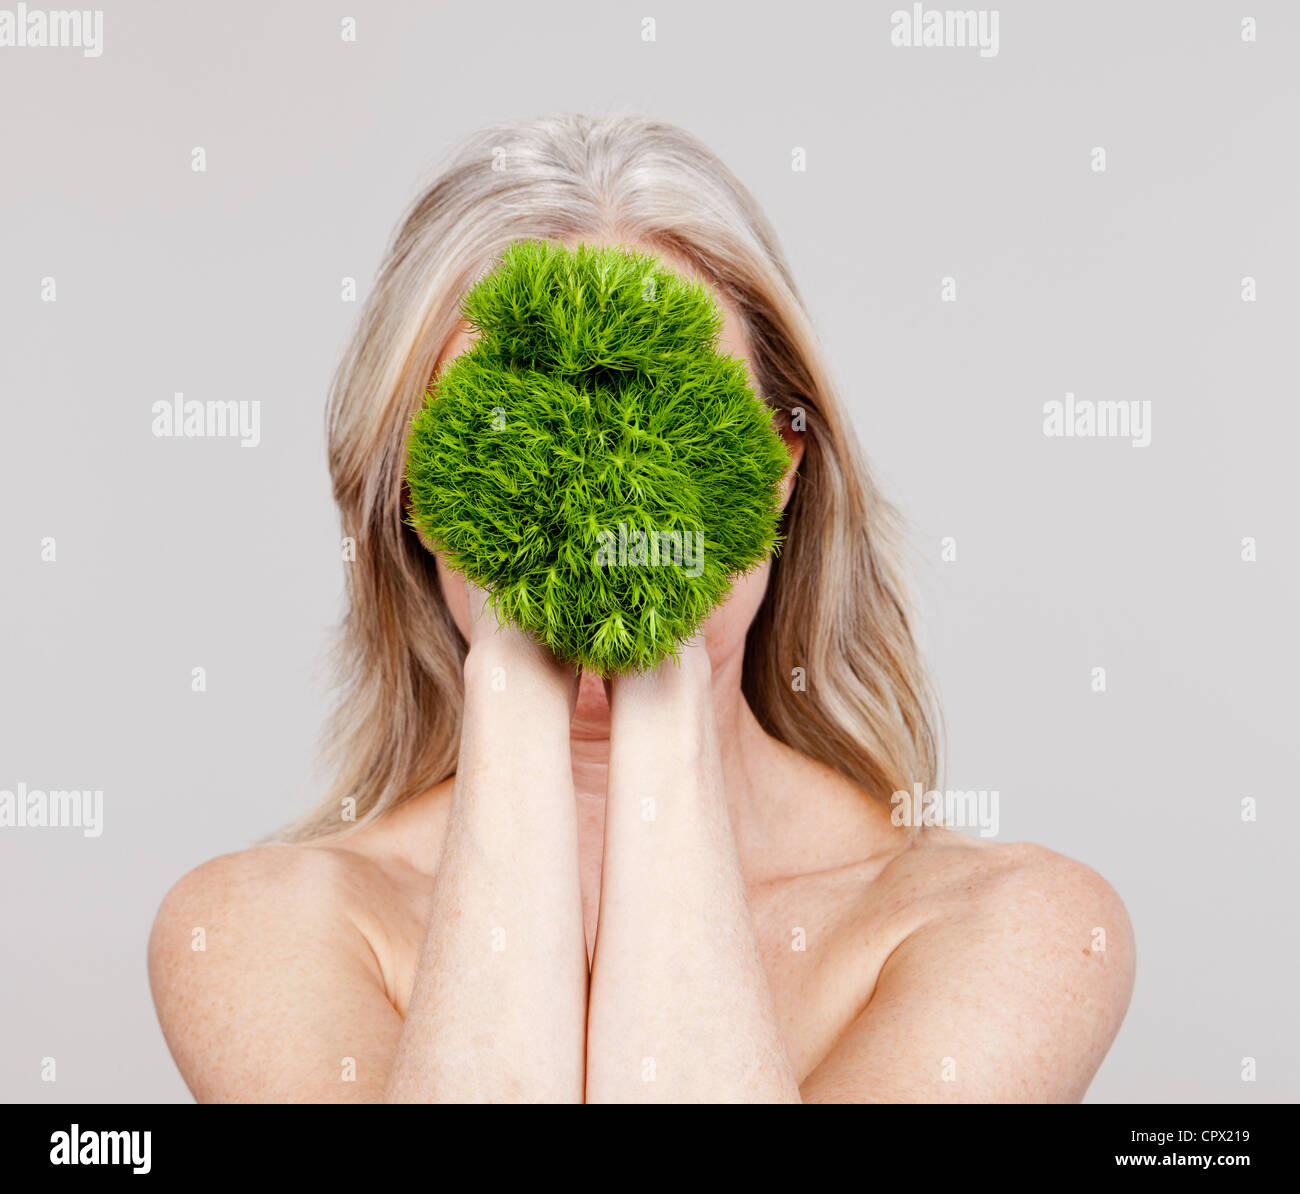 Mature woman holding plant in front of face Stock Photo